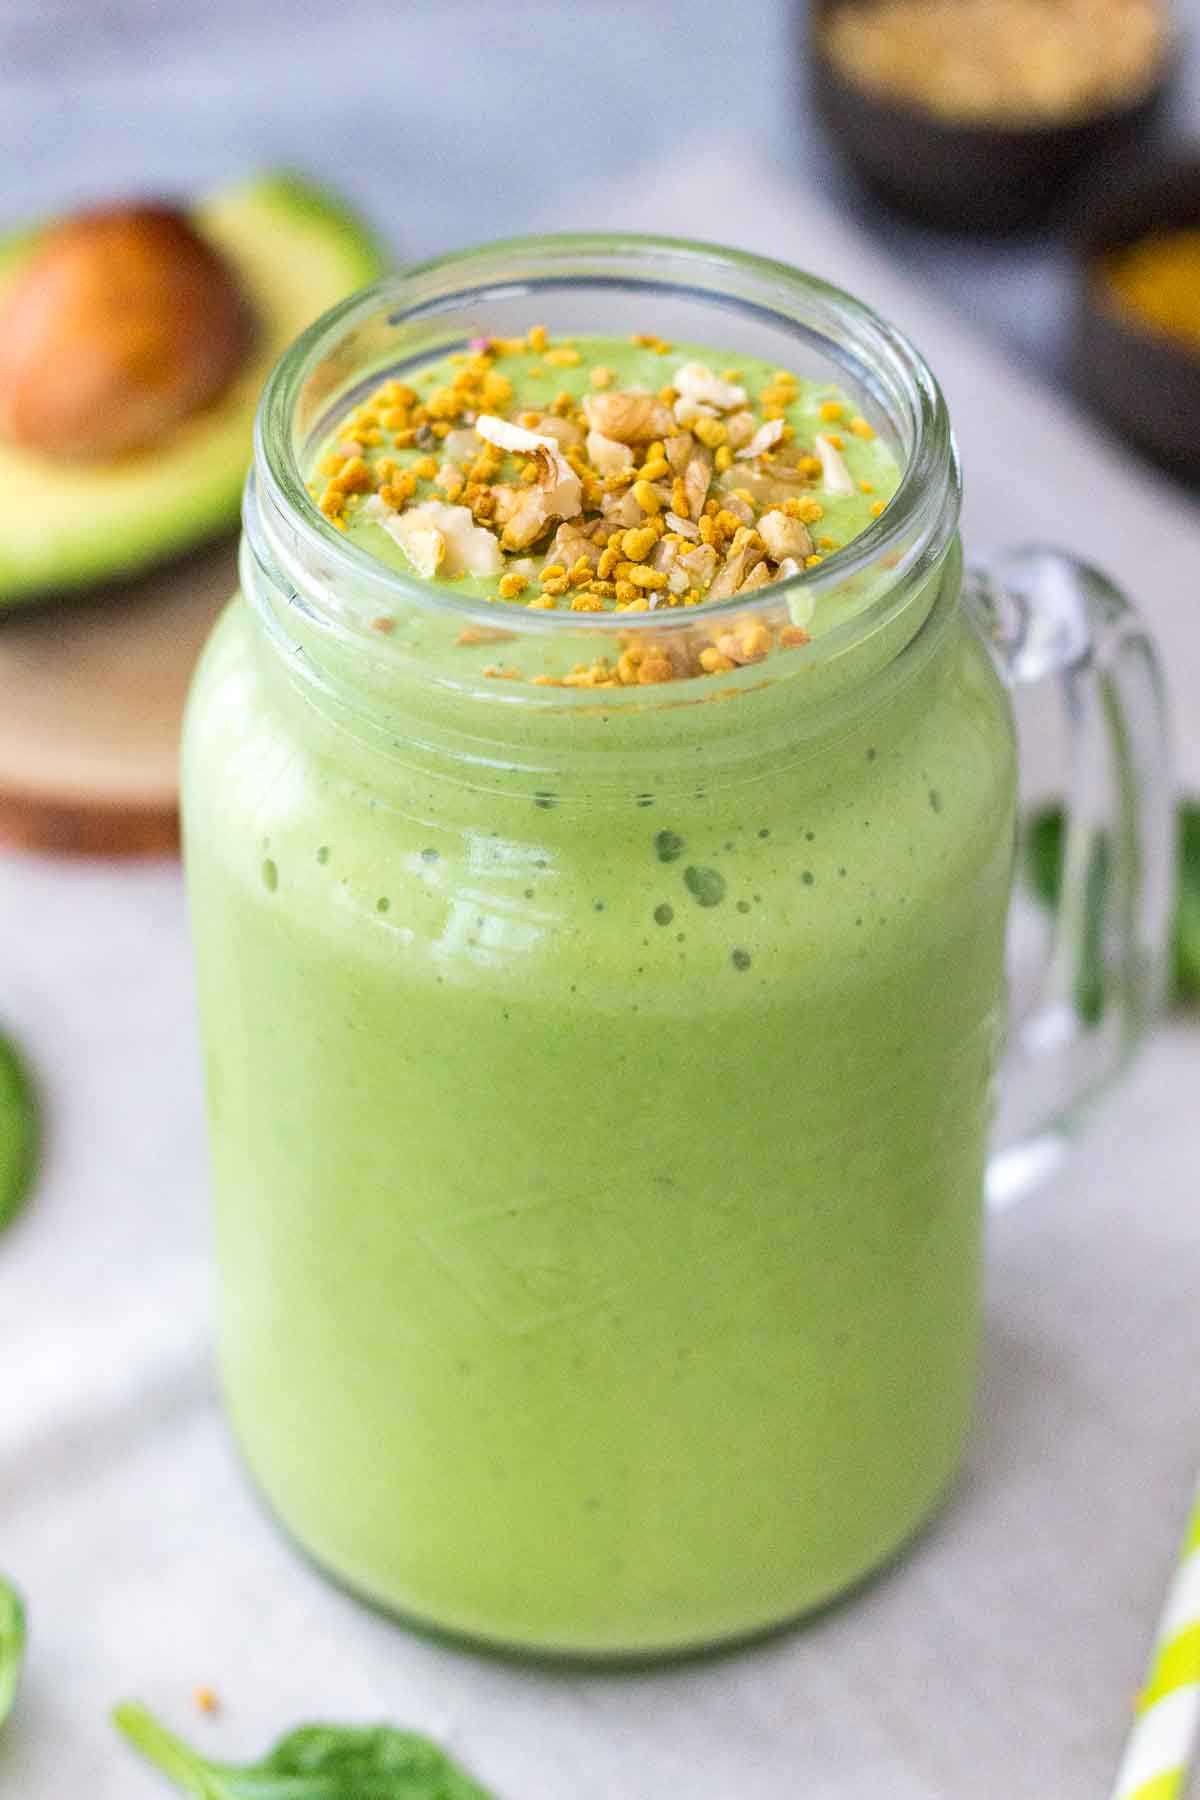 Avocado Smoothie topped with walnuts